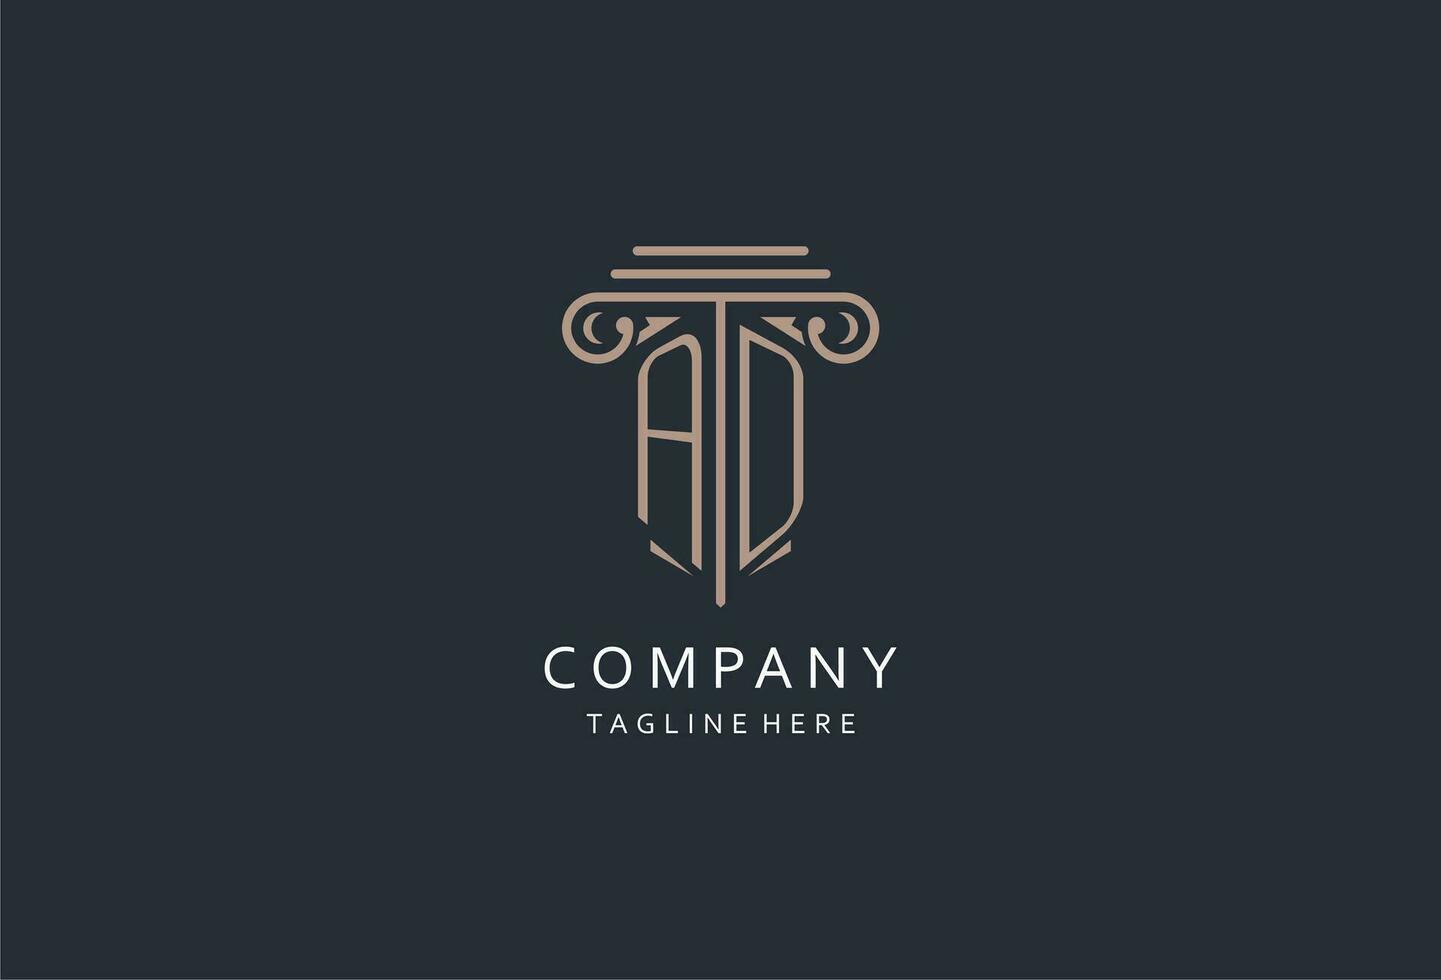 AD monogram logo with pillar shape icon, luxury and elegant design logo for law firm initial style logo vector